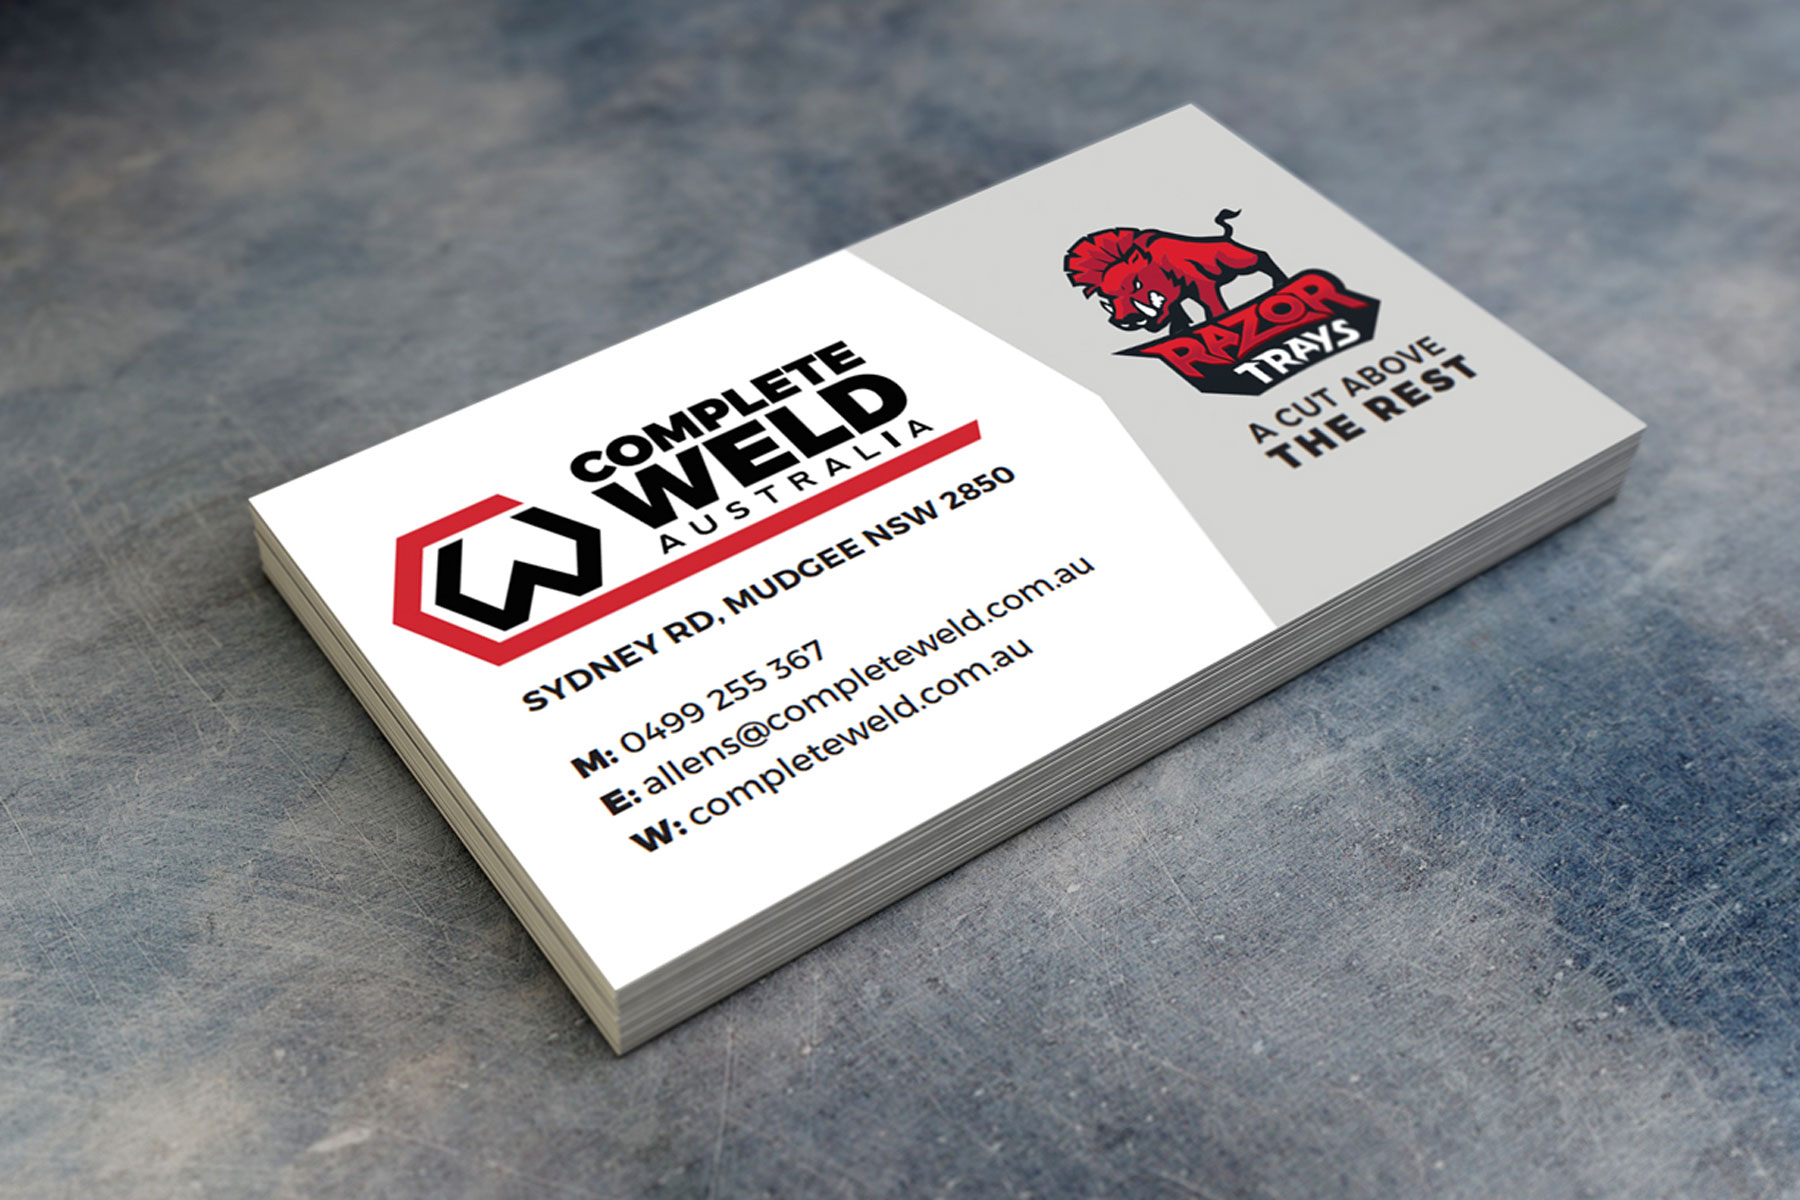 Complete Weld Australia business cards on metal